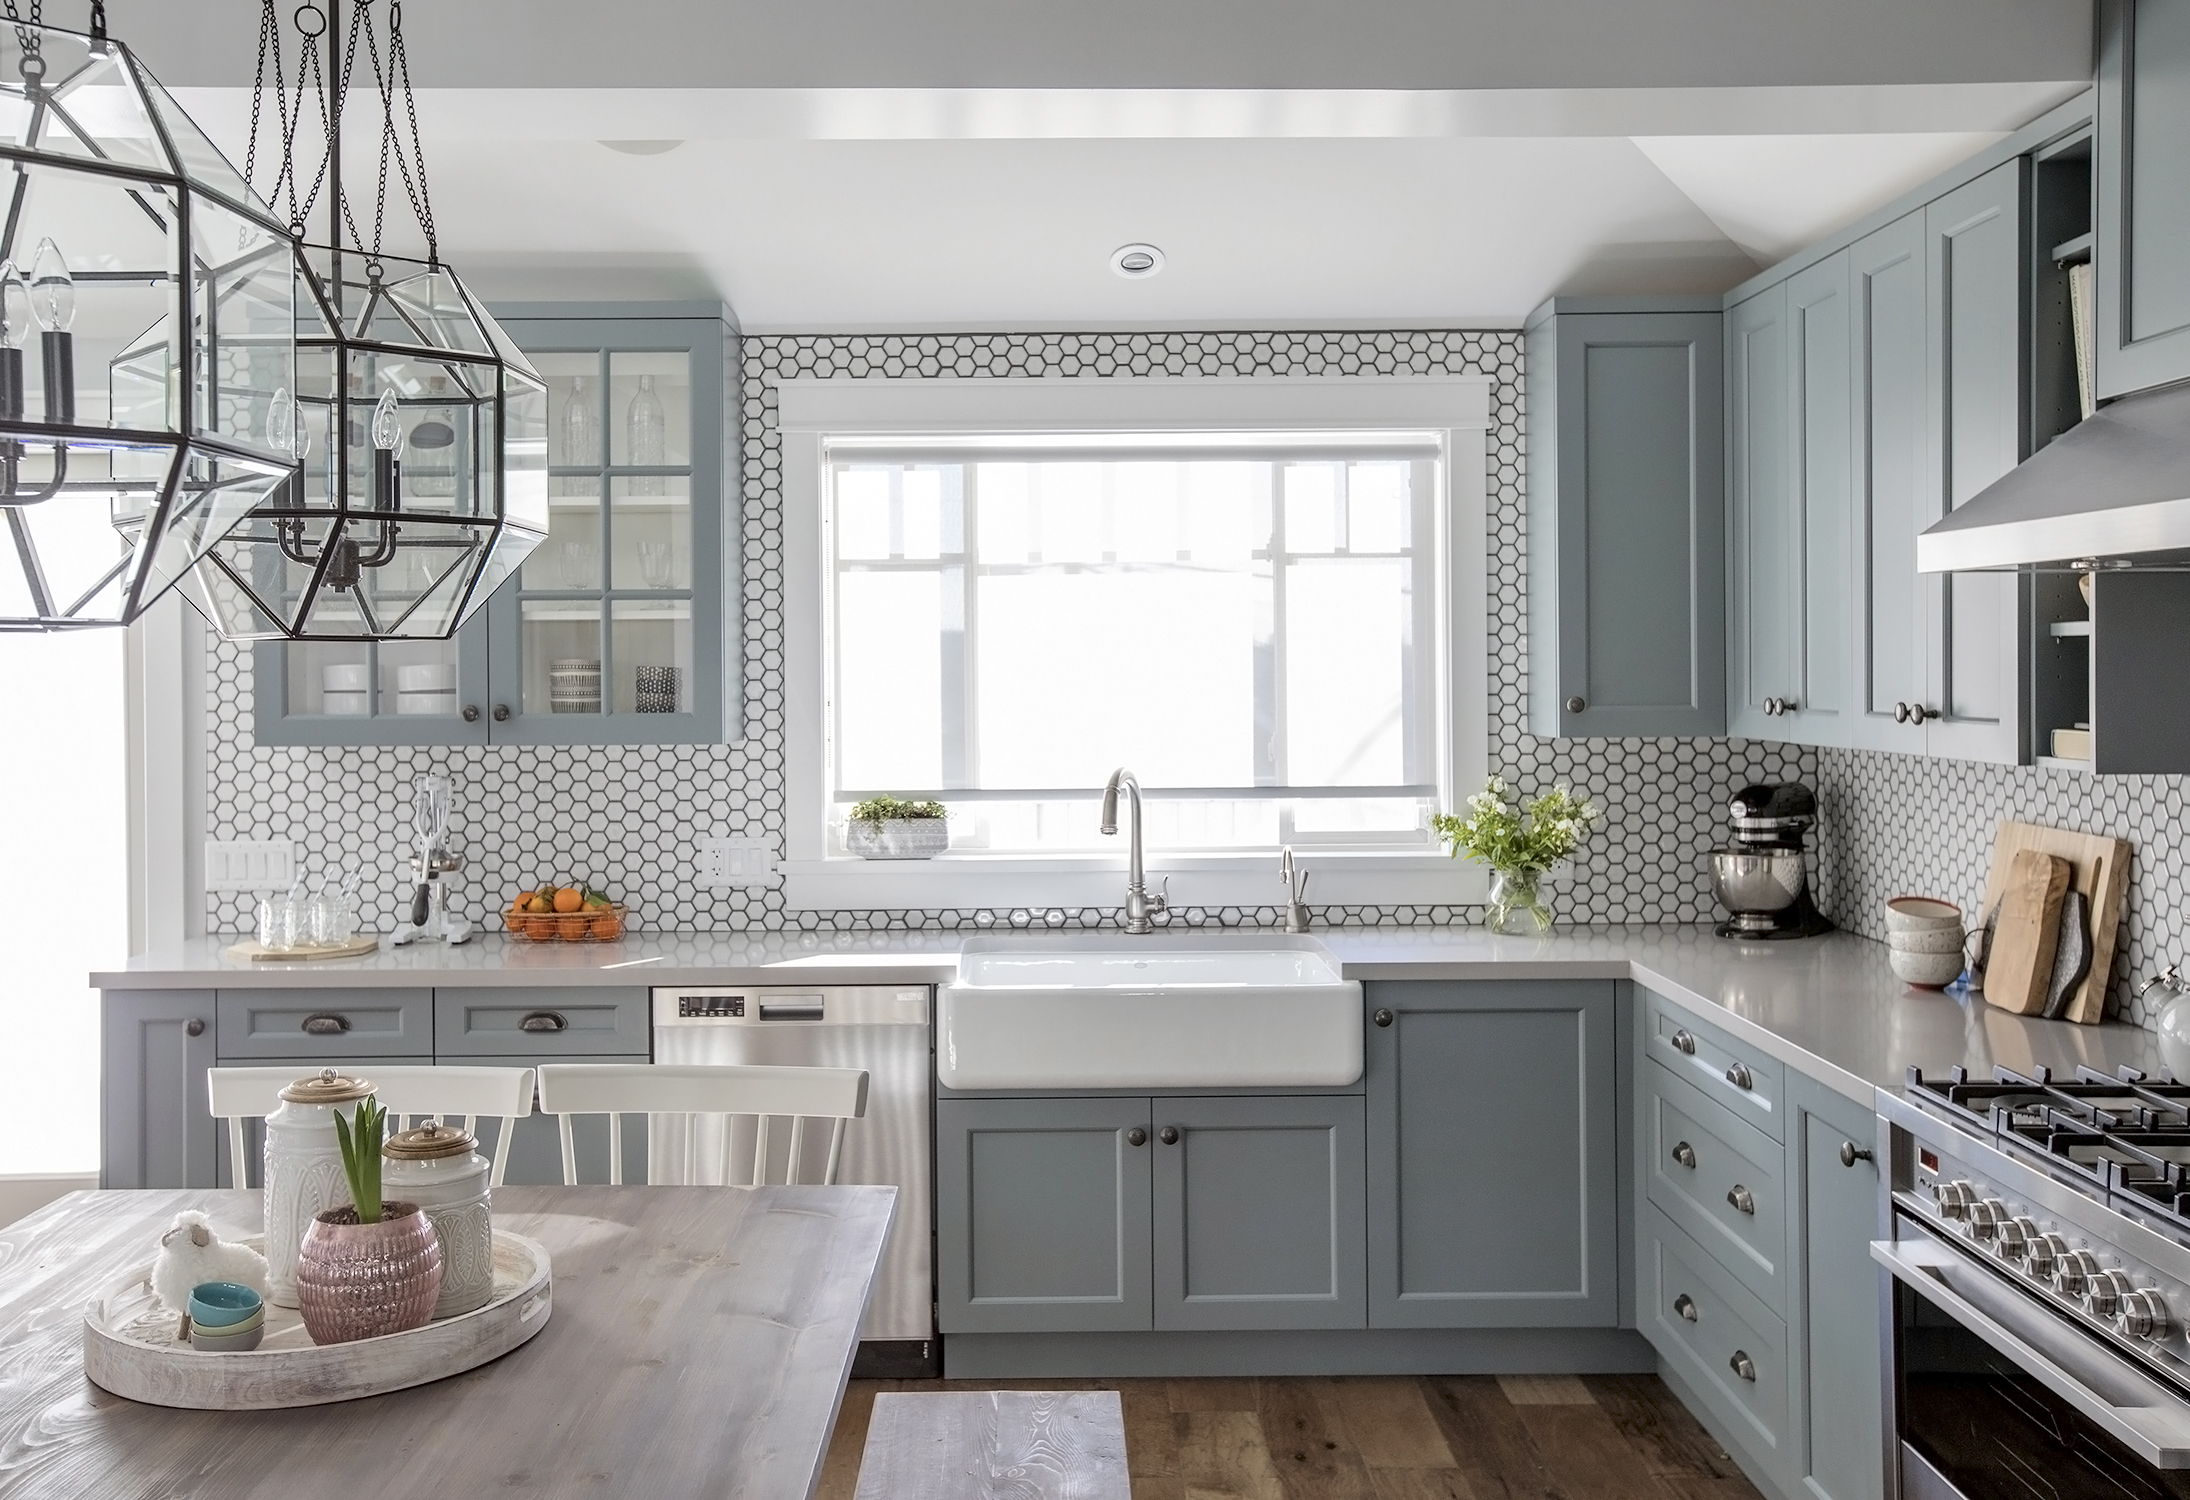 Grey kitchen featuring shaker cabinets, an apron sink and a smattering of stylish hexagon tiles